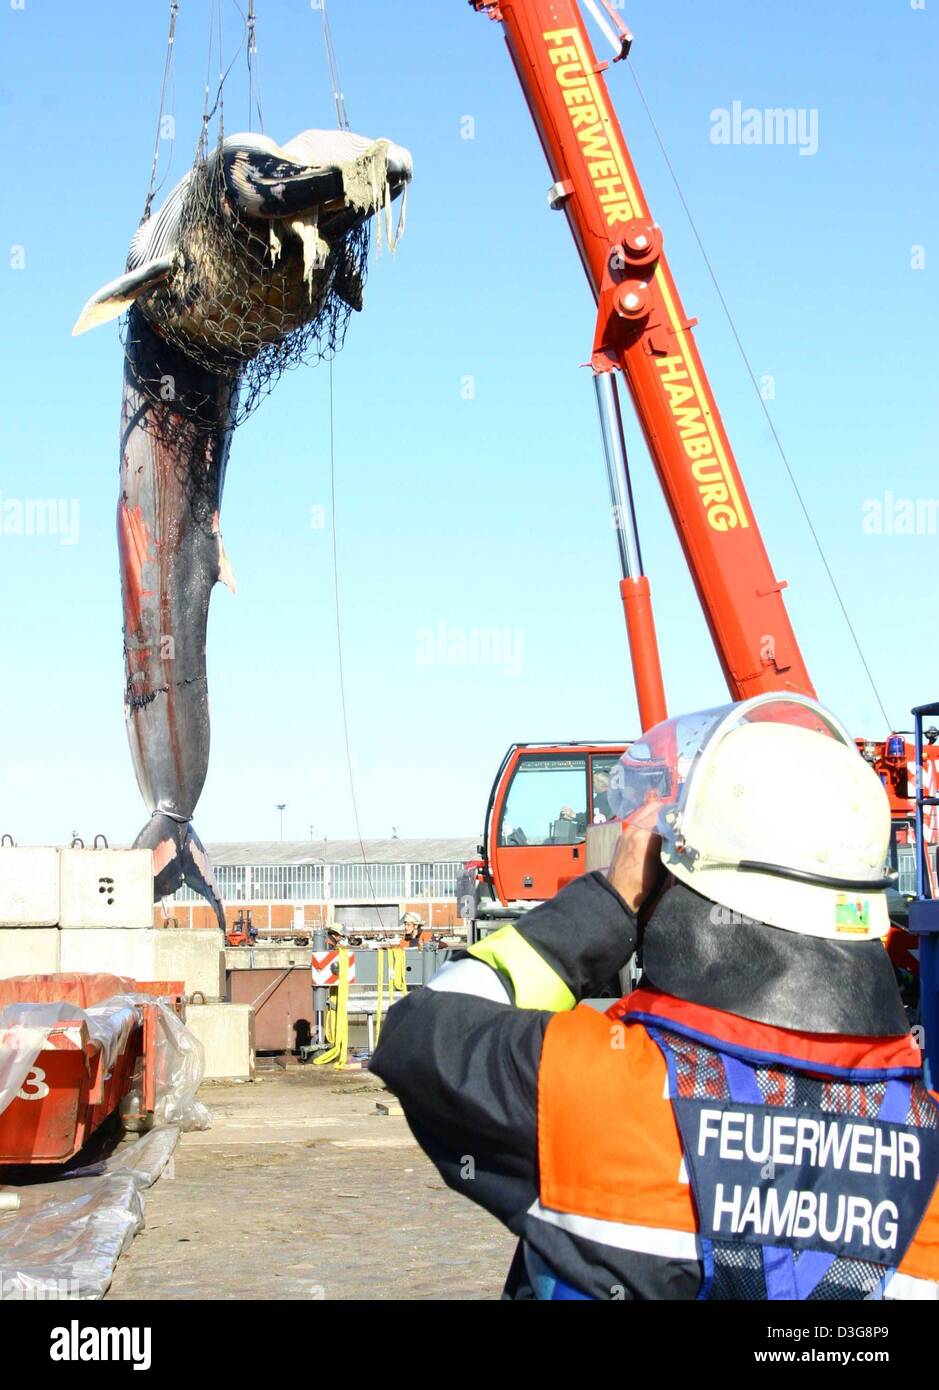 (dpa) - A crane lifts the corpse of a whale as the animal is salvaged from the harbour basin in Hamburg, 14 October 2003. The whale was already dead when it was found in the port. The animal, believed to be a finnback, bears wounds from a marine propeller, a spokesman of the Hamburg firebrigade reported. The 13.3-ton whale has been dead for a longer period of time, and decay has al Stock Photo